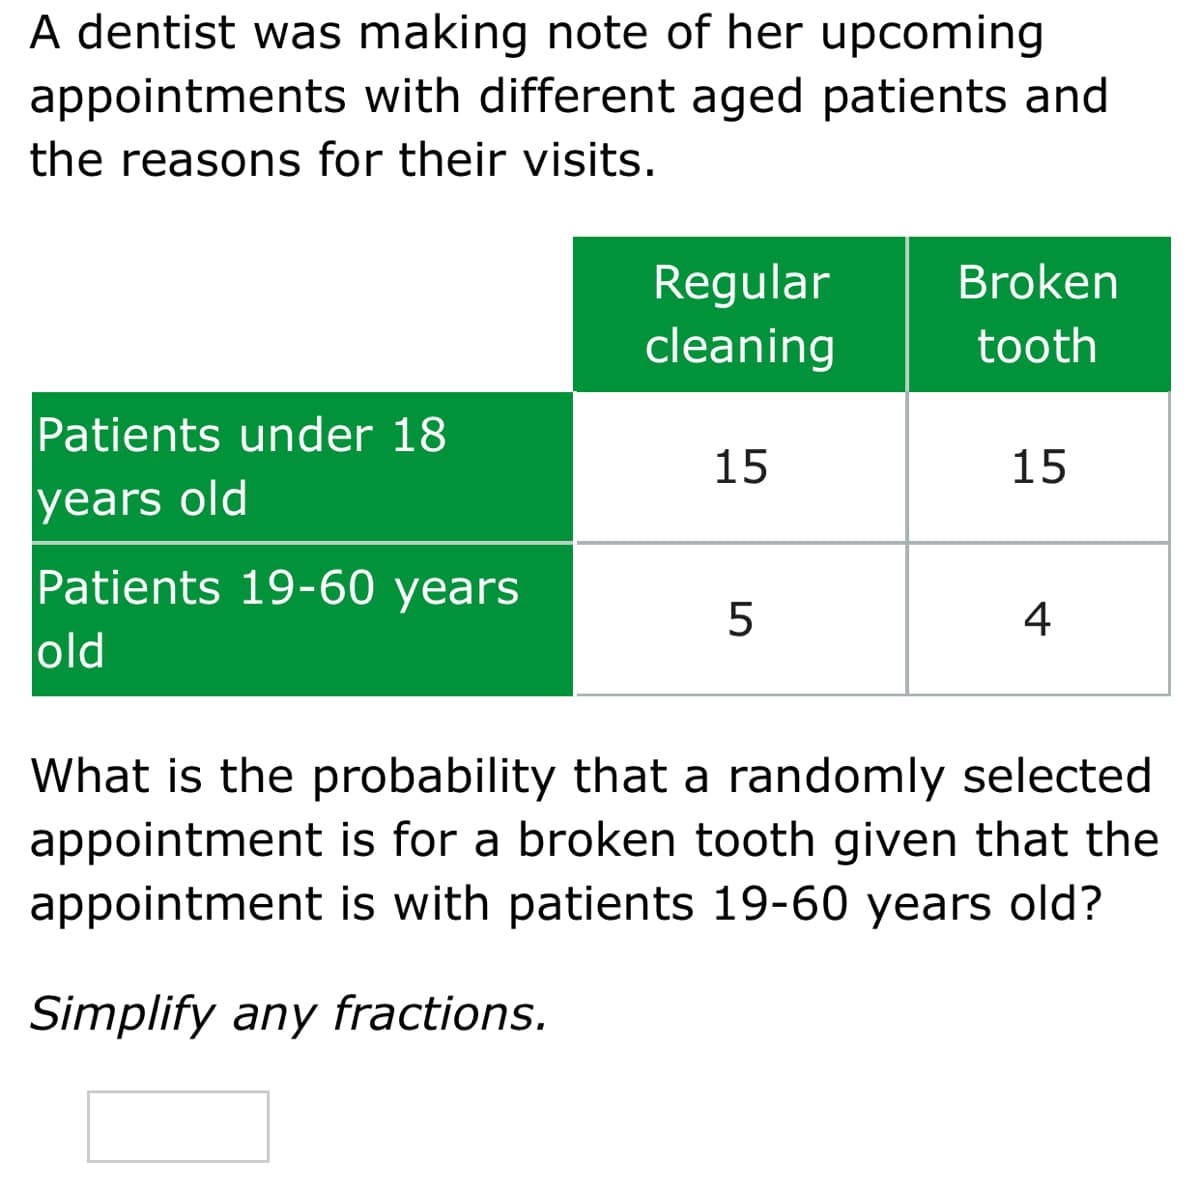 A dentist was making note of her upcoming
appointments with different aged patients and
the reasons for their visits.
Broken
Regular
cleaning
tooth
Patients under 18
15
15
years old
Patients 19-60 years
old
5
4
What is the probability that a randomly selected
appointment is for a broken tooth given that the
appointment is with patients 19-60 years old?
Simplify any fractions.
